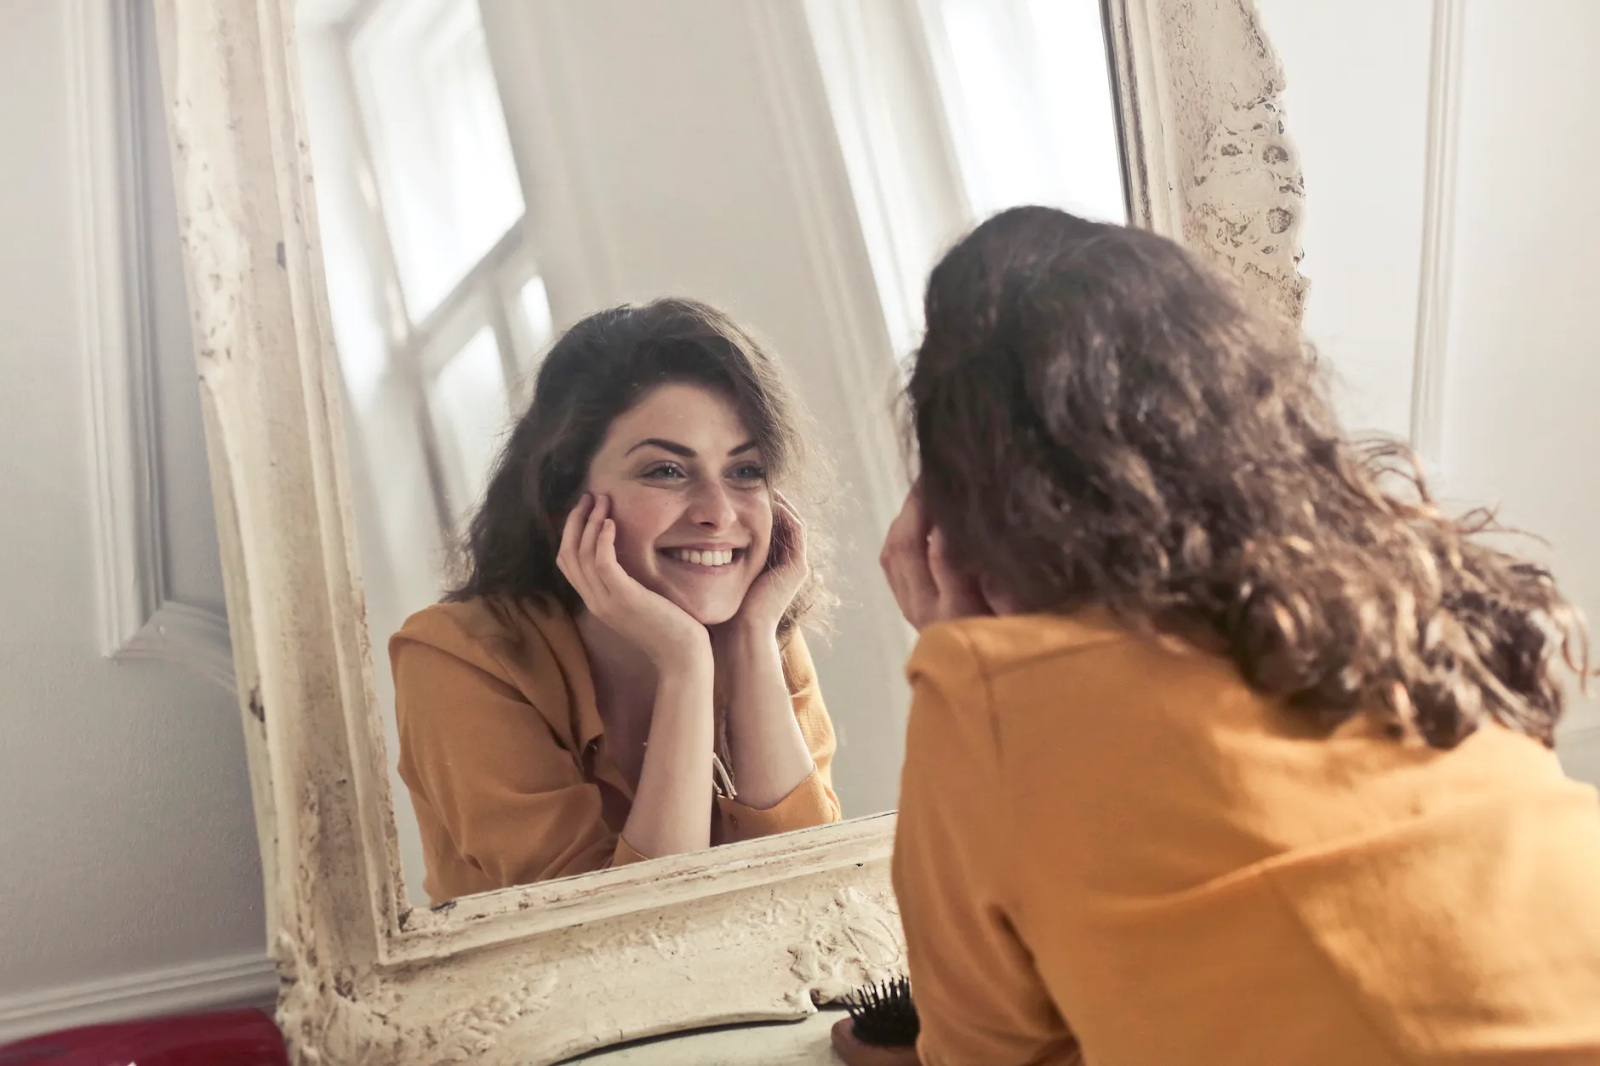 A woman wearing a yellow shirt cups her face as she smiles at her reflection in an ornate white mirror 